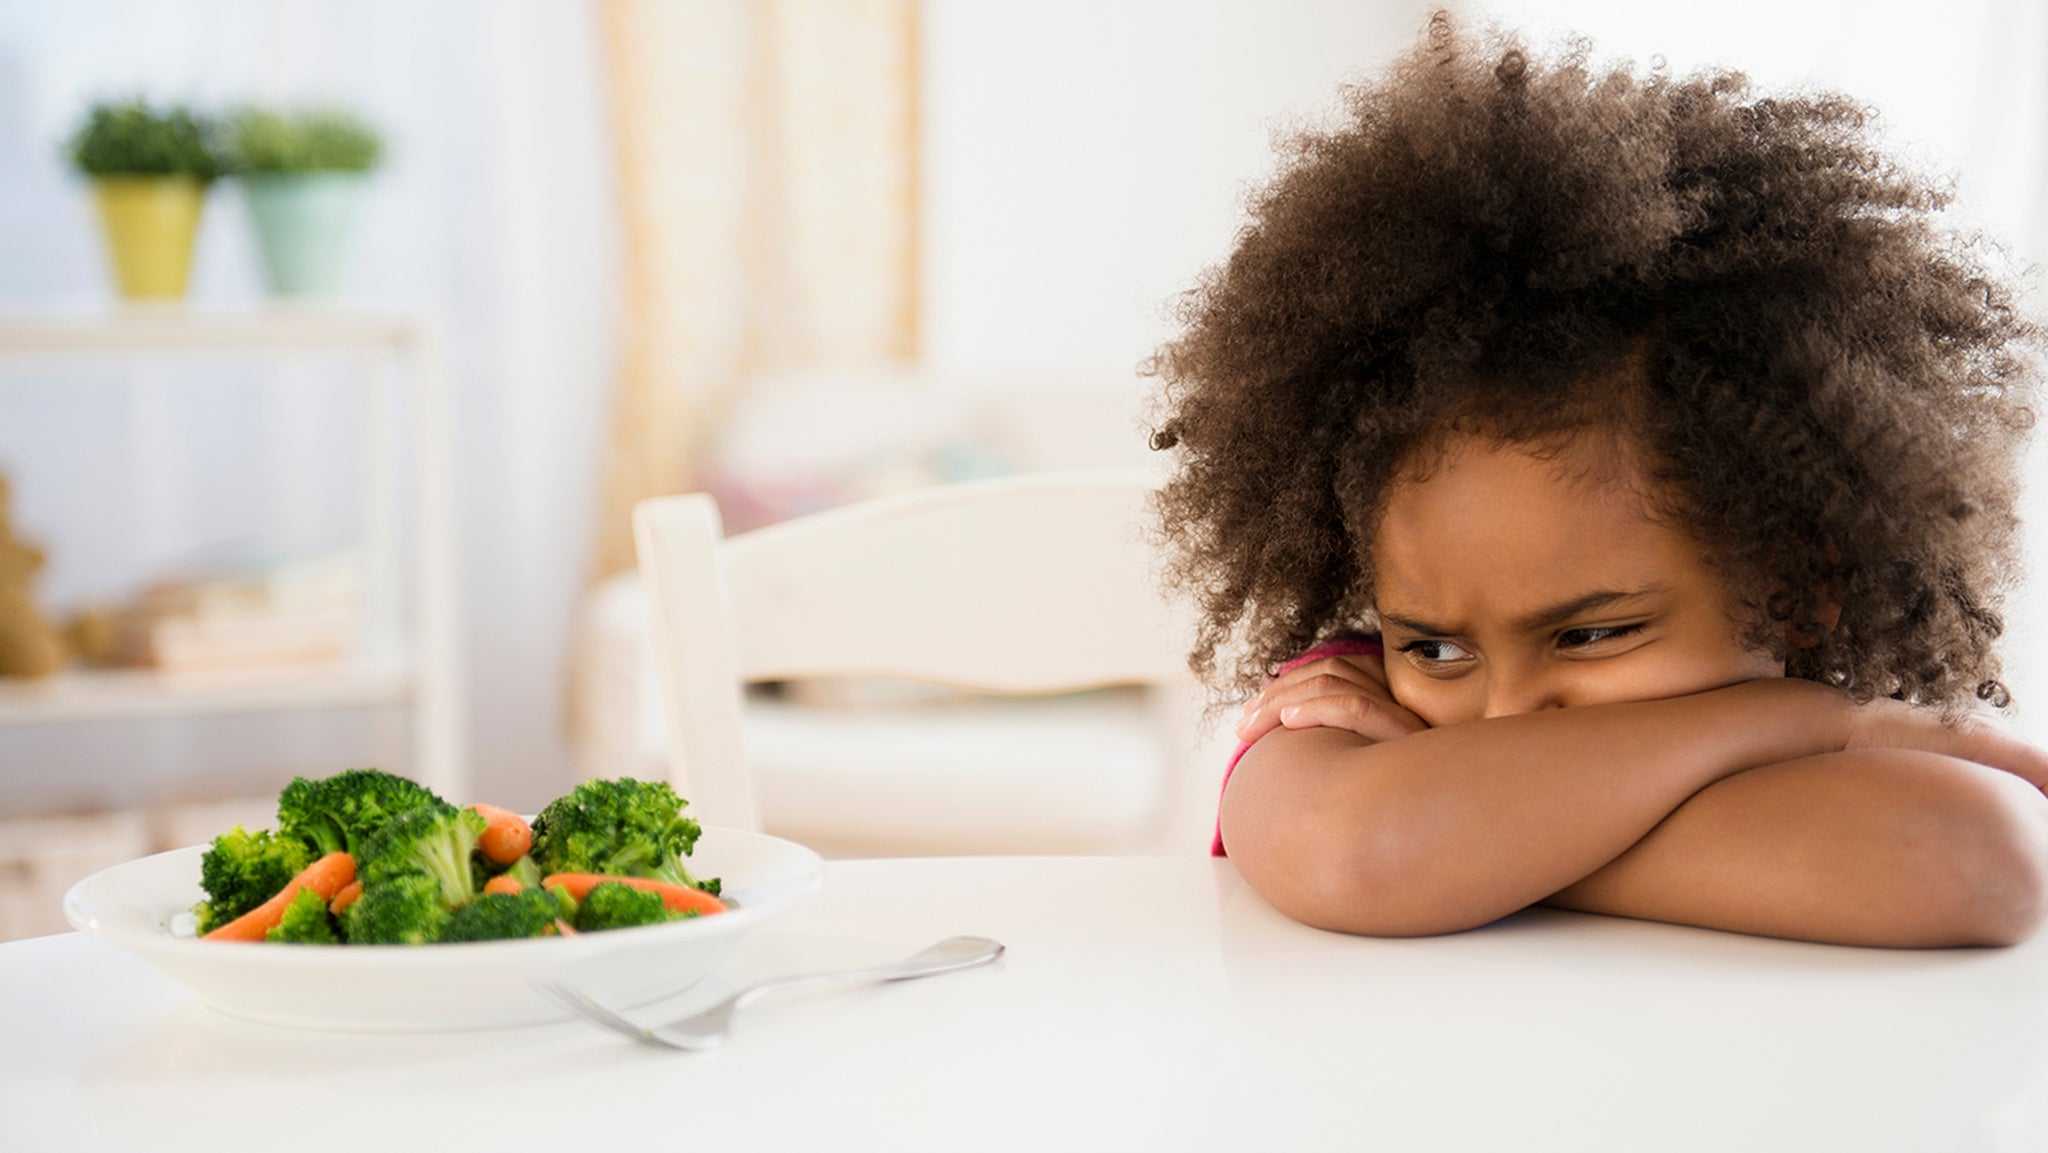 How	to deal with	your	kids	if	they	are	picky	eaters